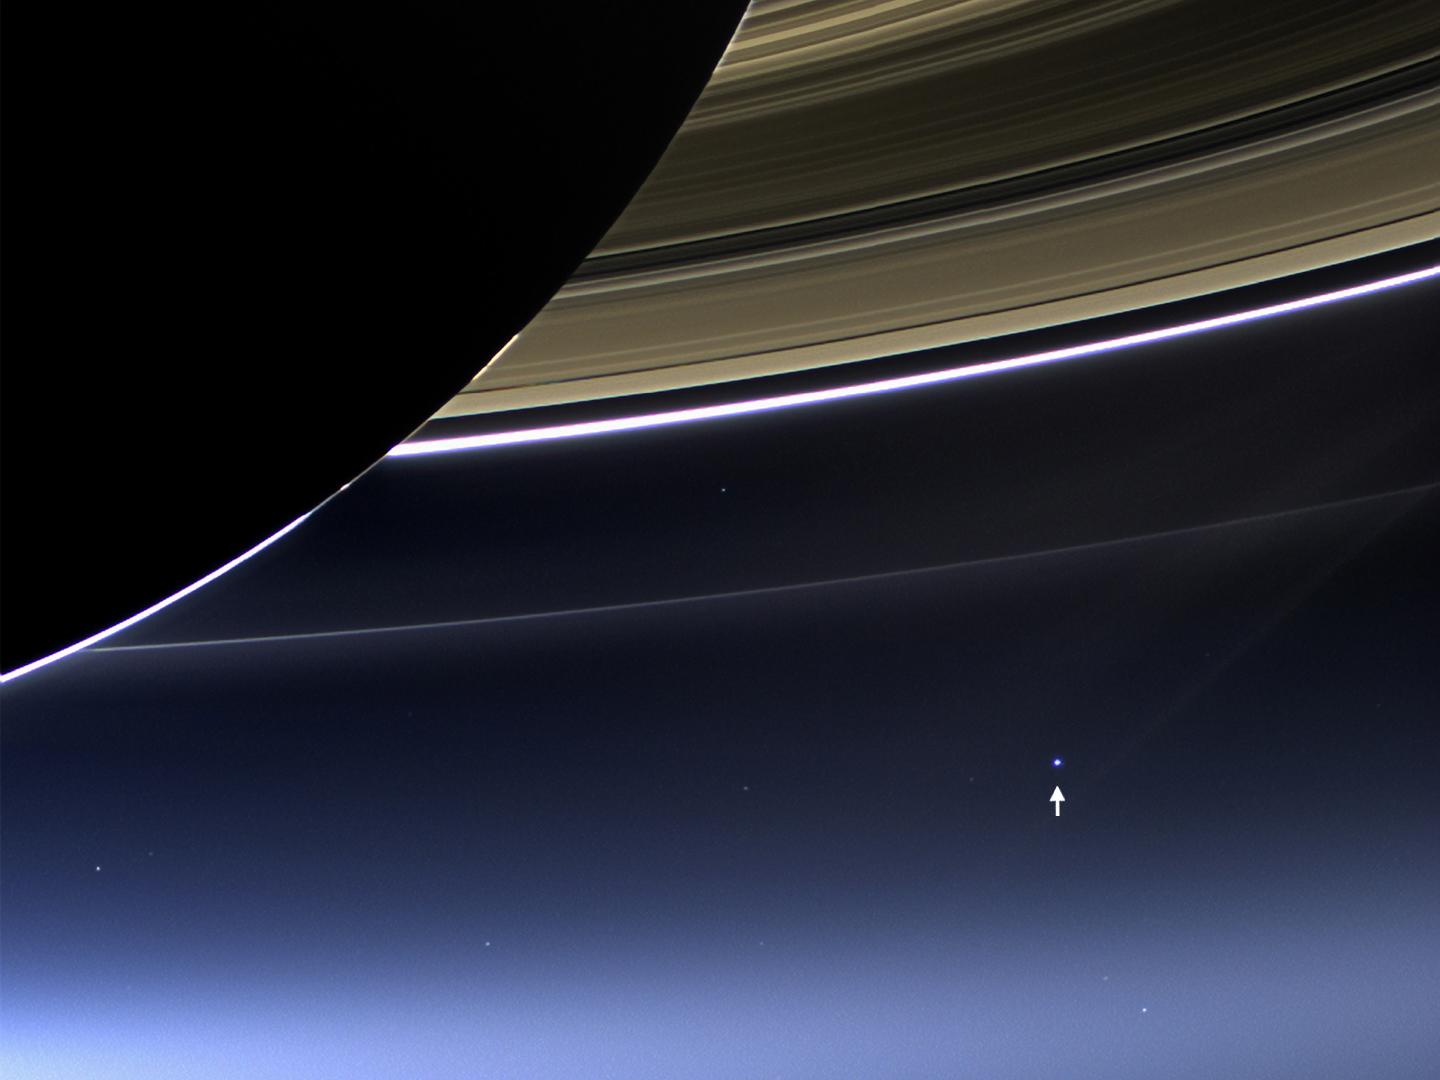 An image from Saturn showing a minuscule planet Earth in the distance